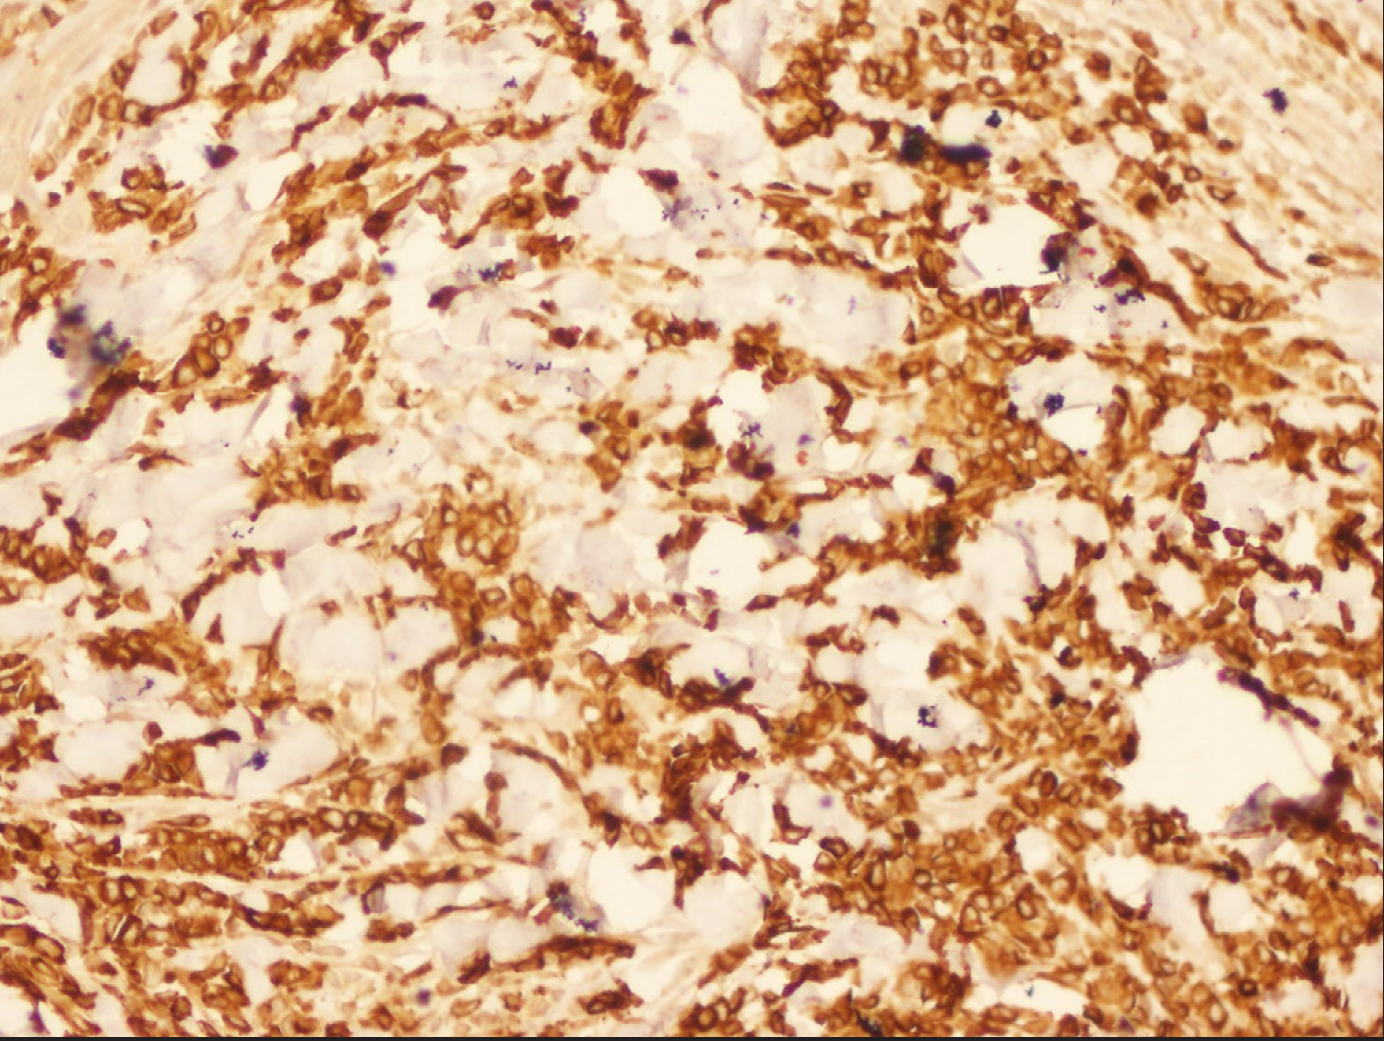 Immunohistochemical analysis shows positivity of blast cells to CD117